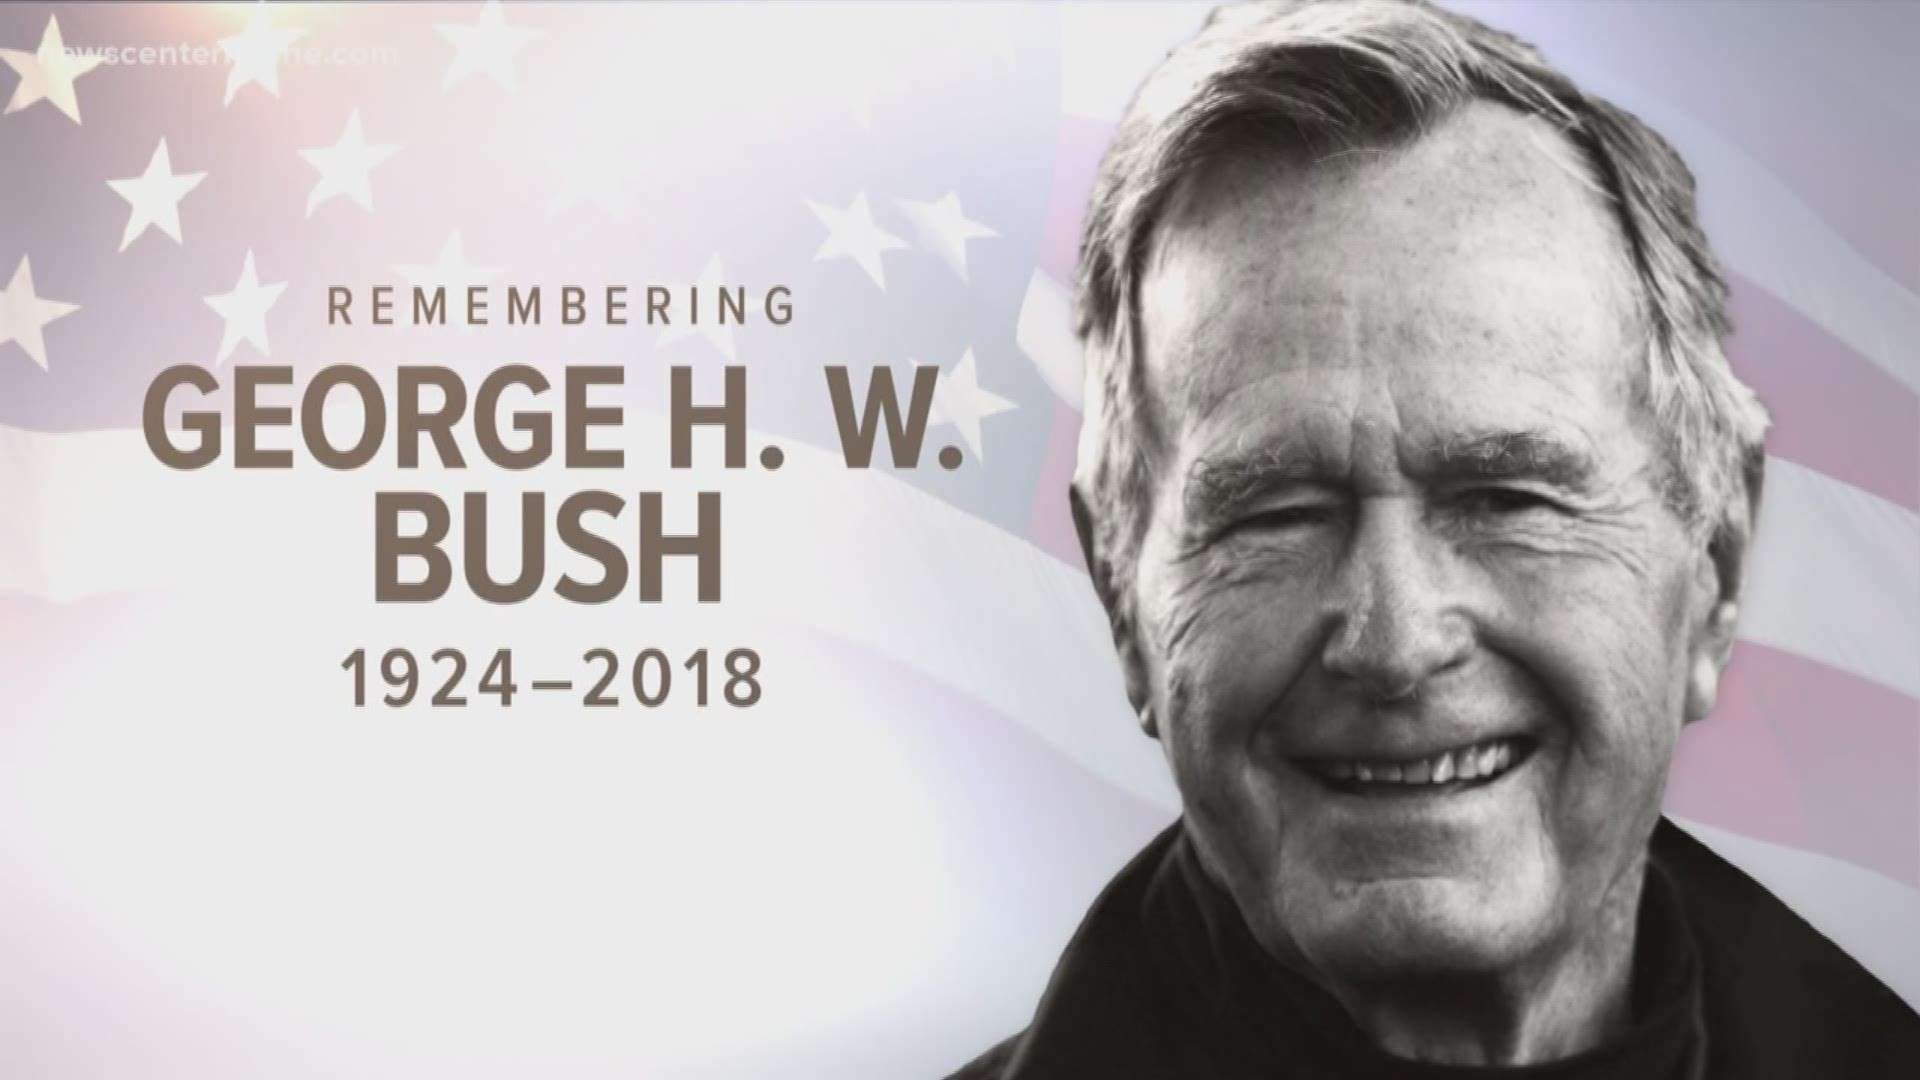 After days of mourning and celebrating the 41st President's life, today is the day we all finally say goodbye.